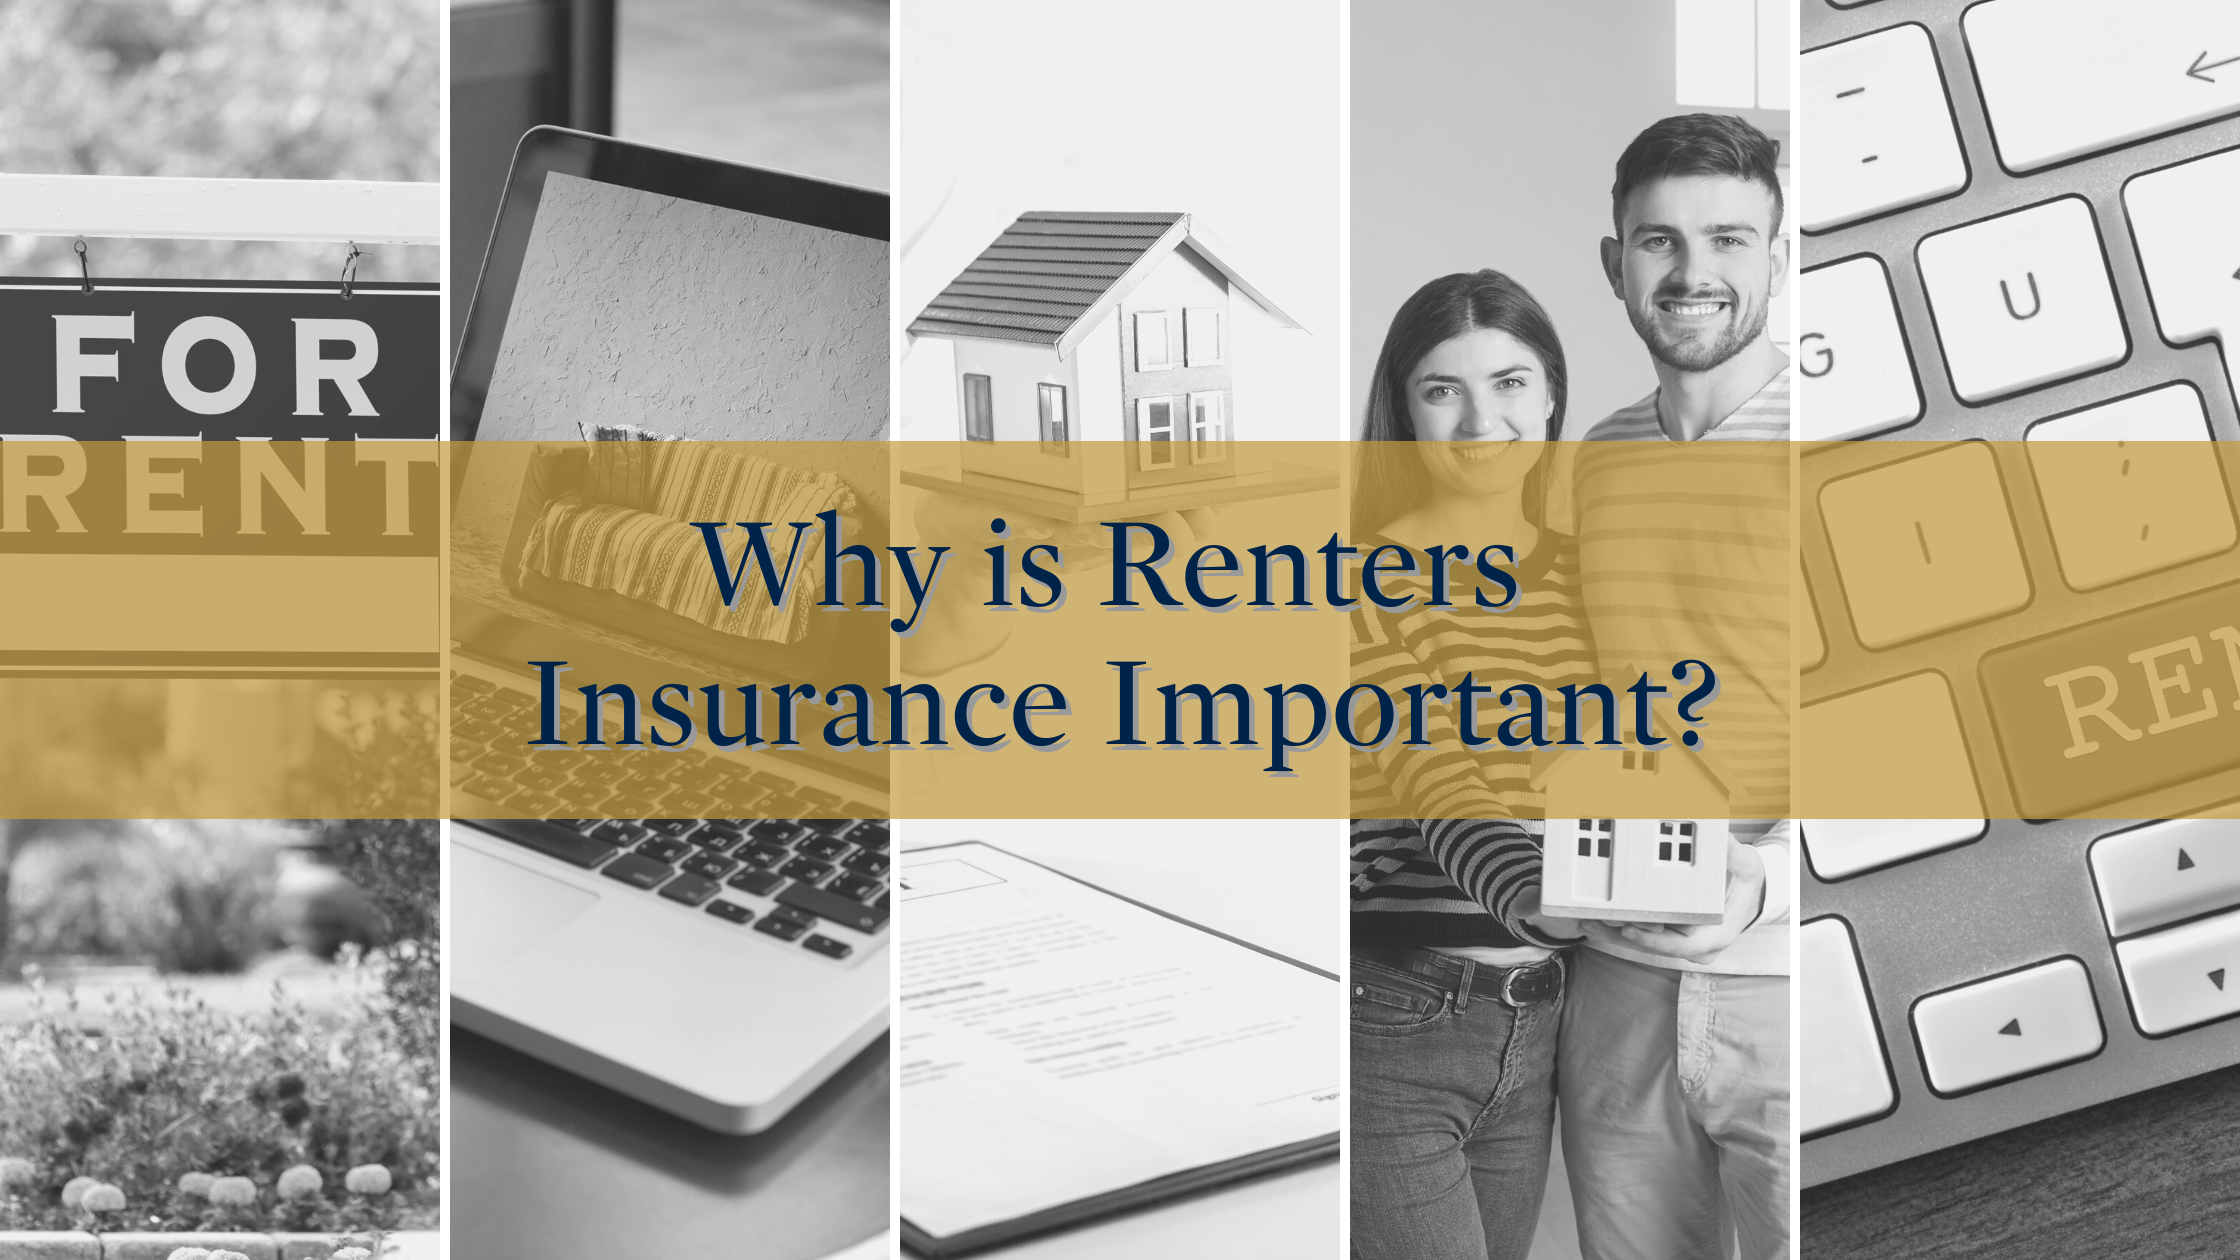 Why is Renters Insurance Important?